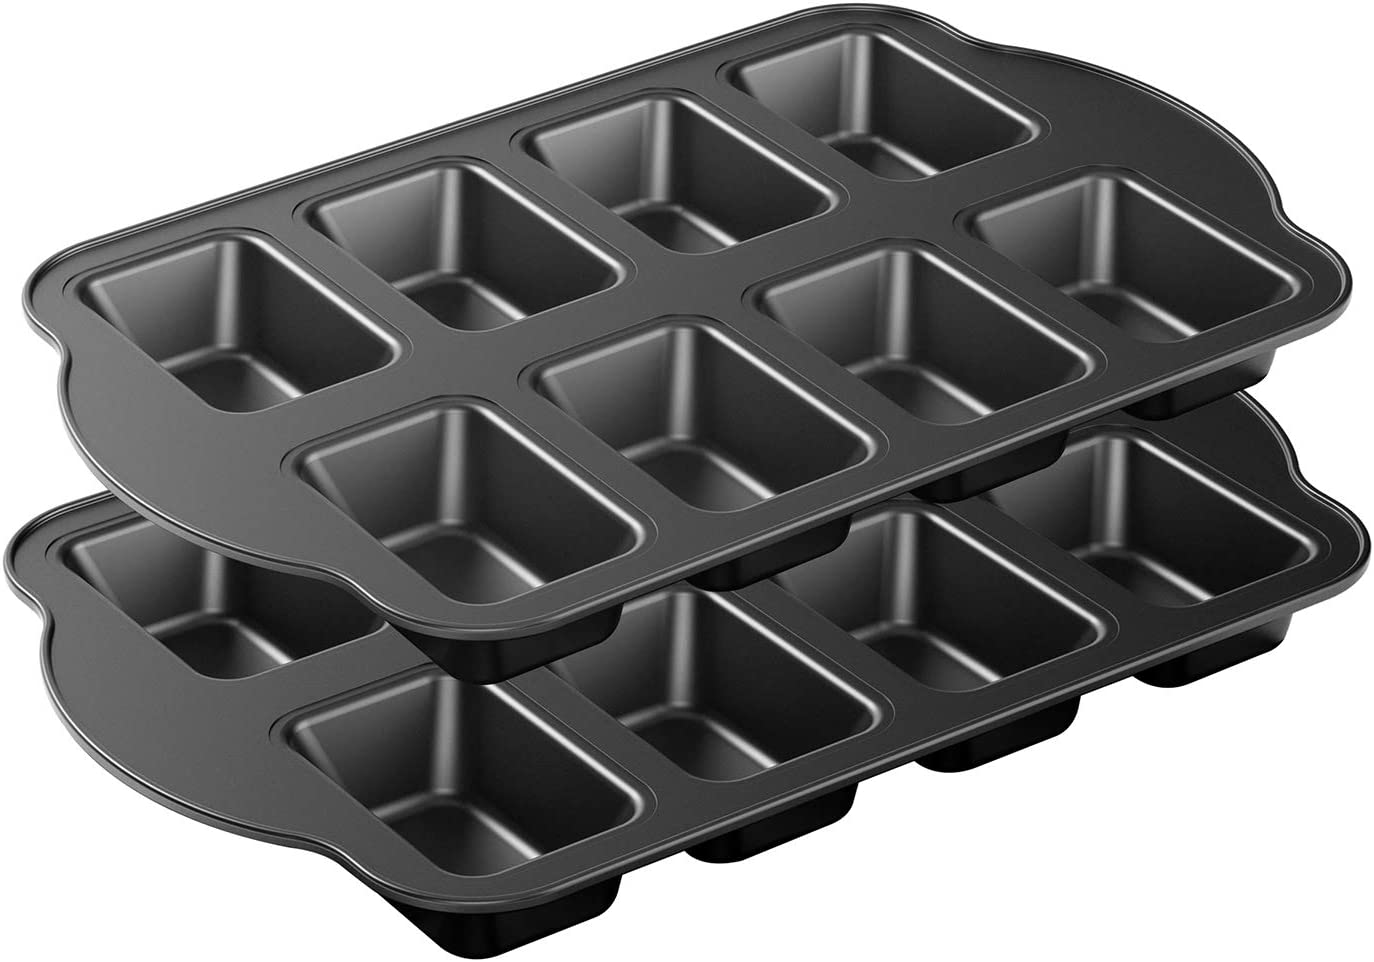 SILIVO Silicone Jumbo Muffin Pans Nonstick 6 Cup(2 Pack) - 3.5